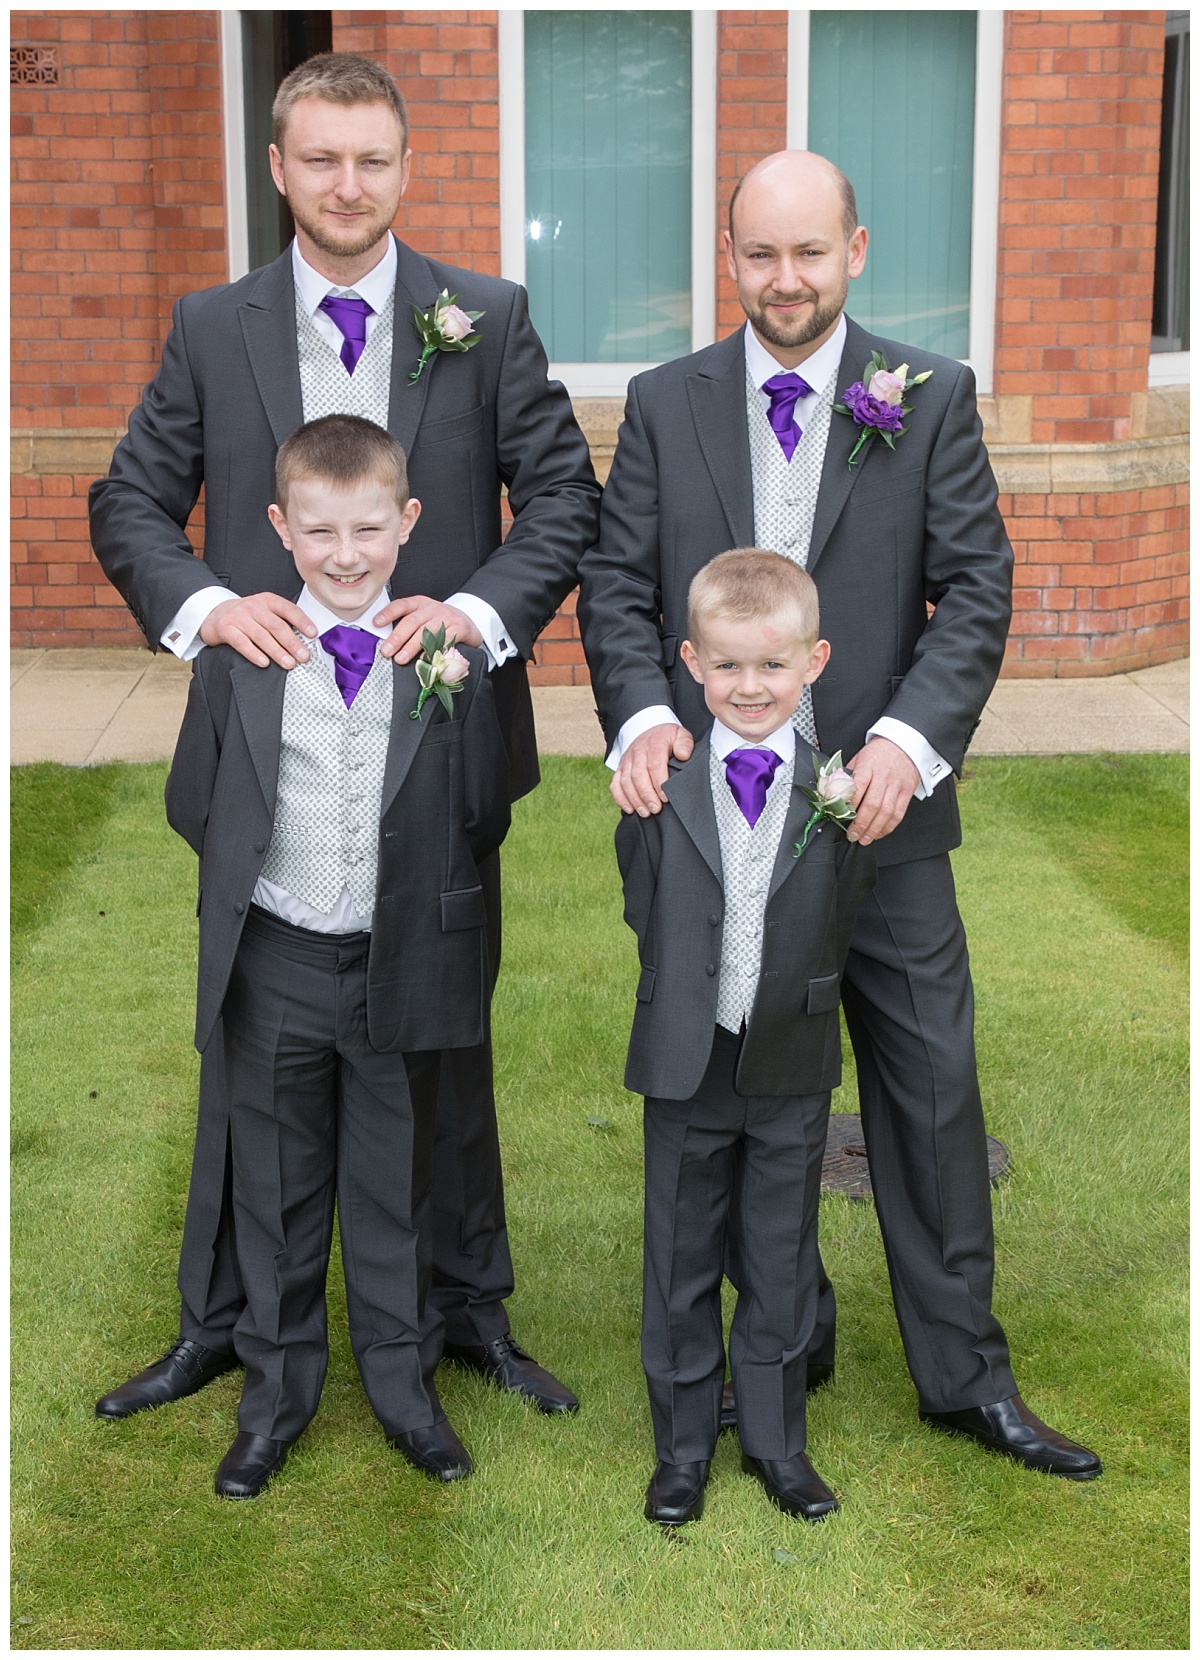 Wedding Photography Manchester - Leigh and Dave's Cheadle House Wedding Day 13